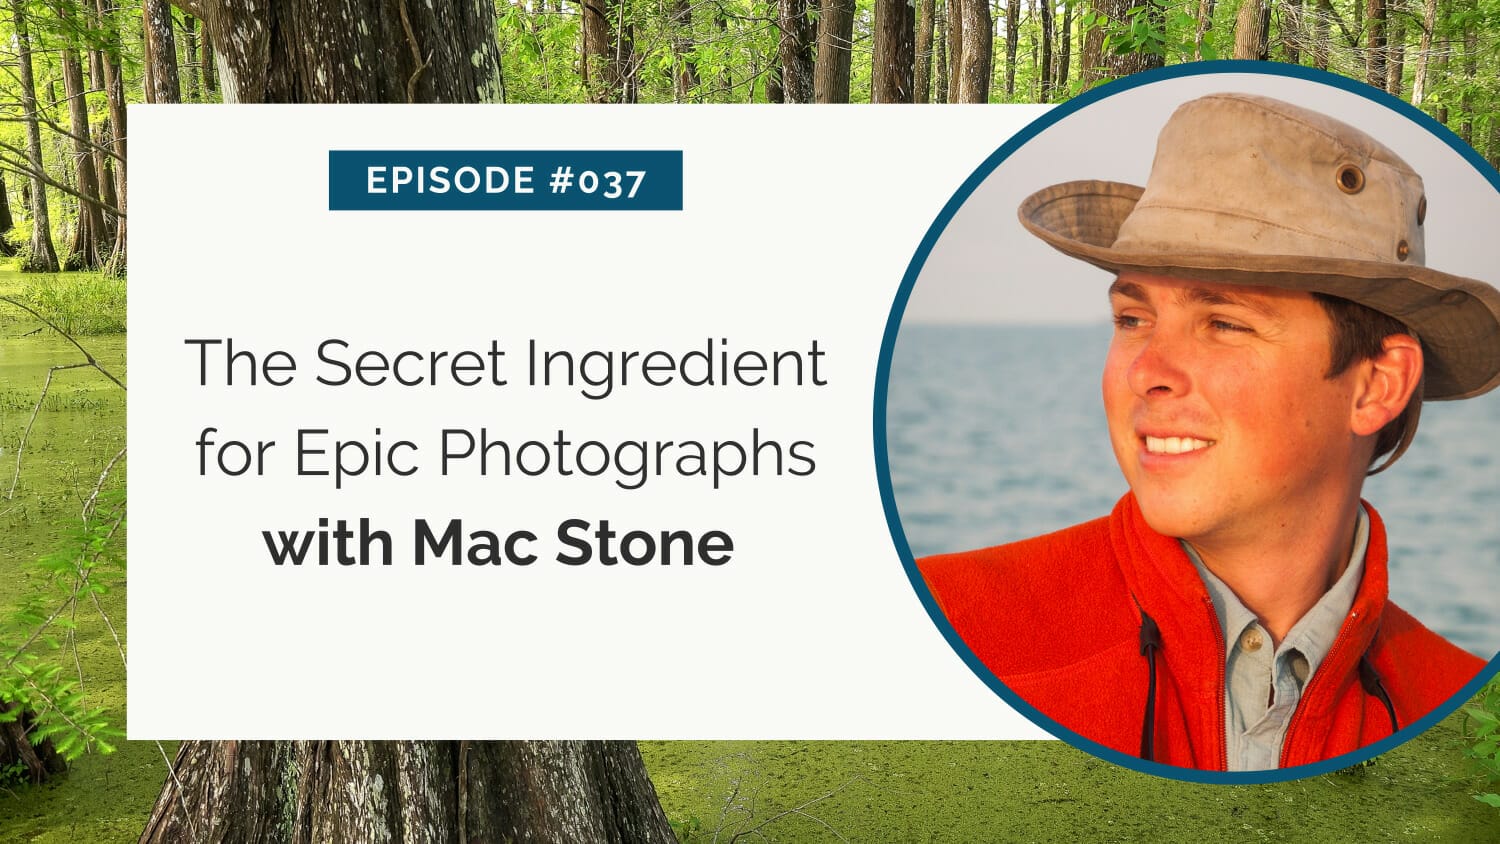 Podcast episode promotion featuring guest mac stone discussing the secret ingredient for epic photographs.